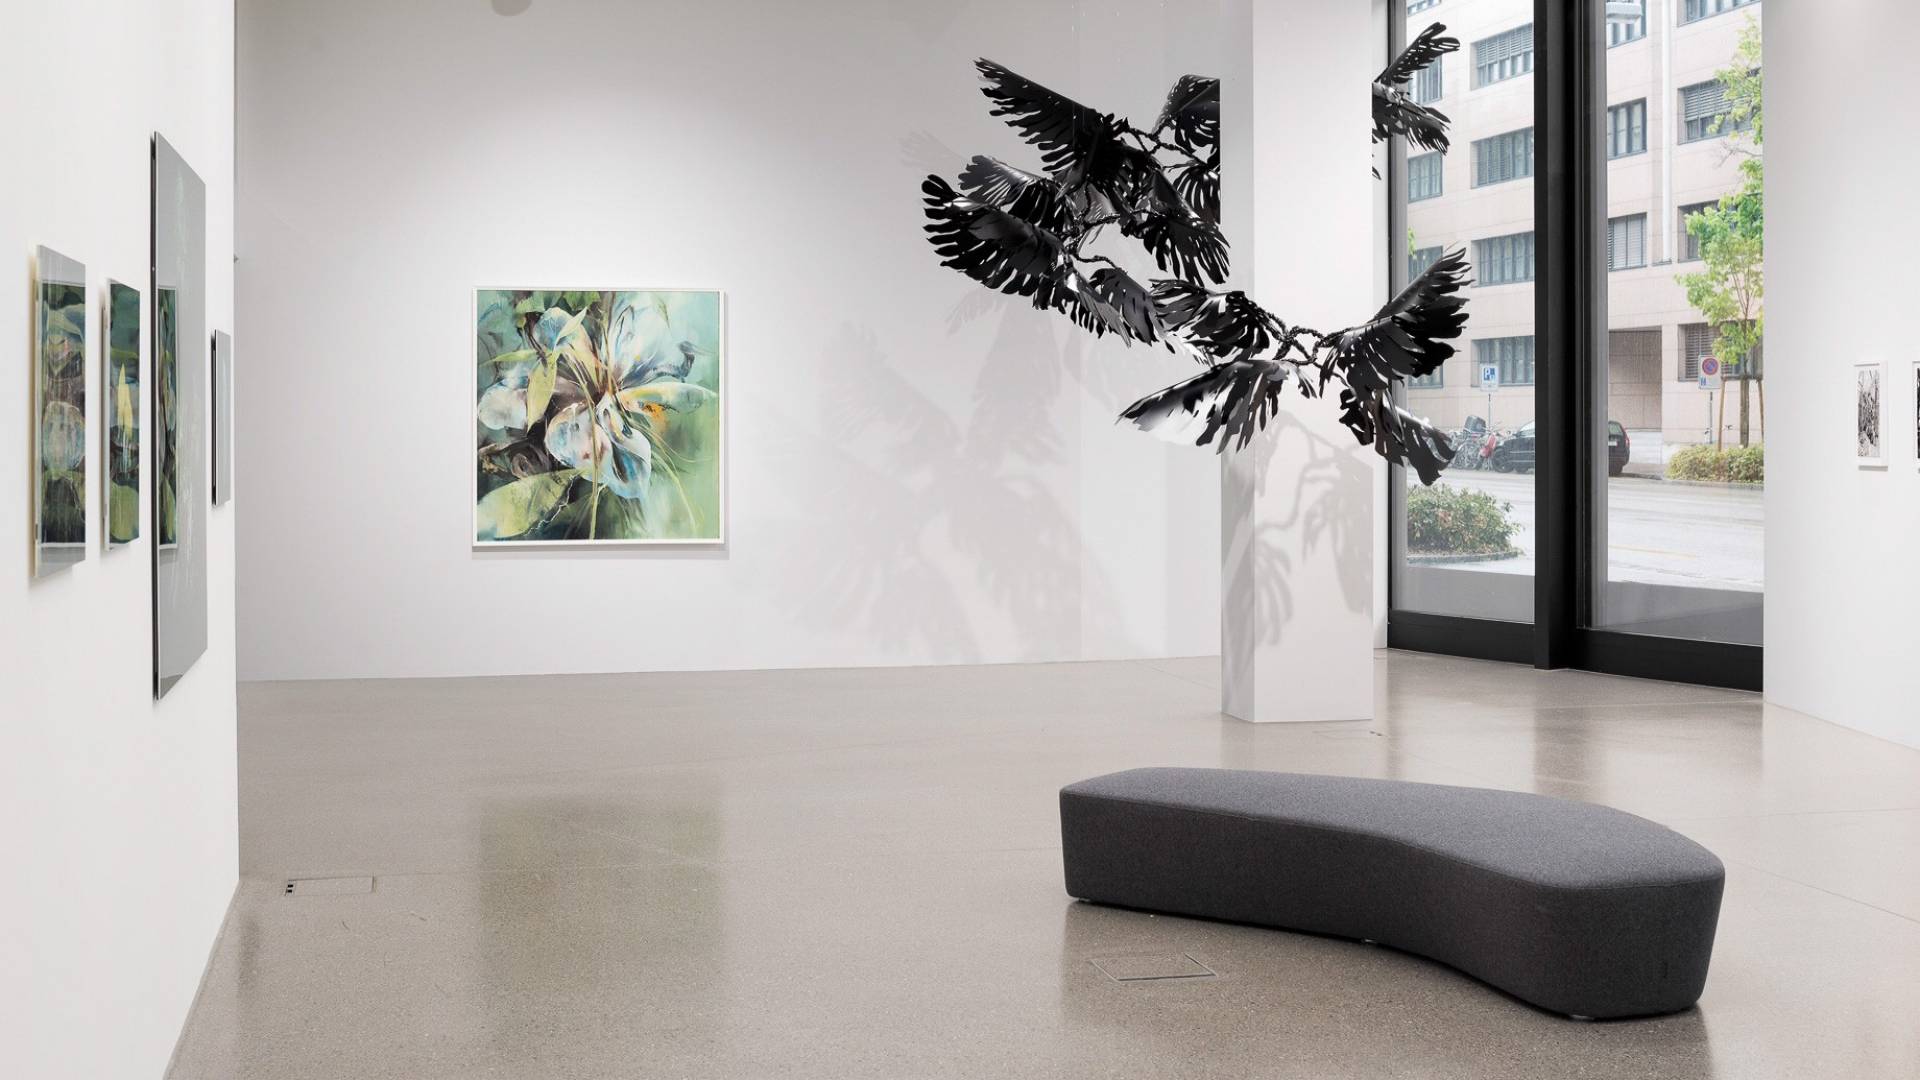 “Monstera” – the decorative indoor plant created by Franziska Furter in black PVC floats in the room, suspended on nylon threads. A painting by Basel artist Helmuth Mahrer hangs on the back wall.